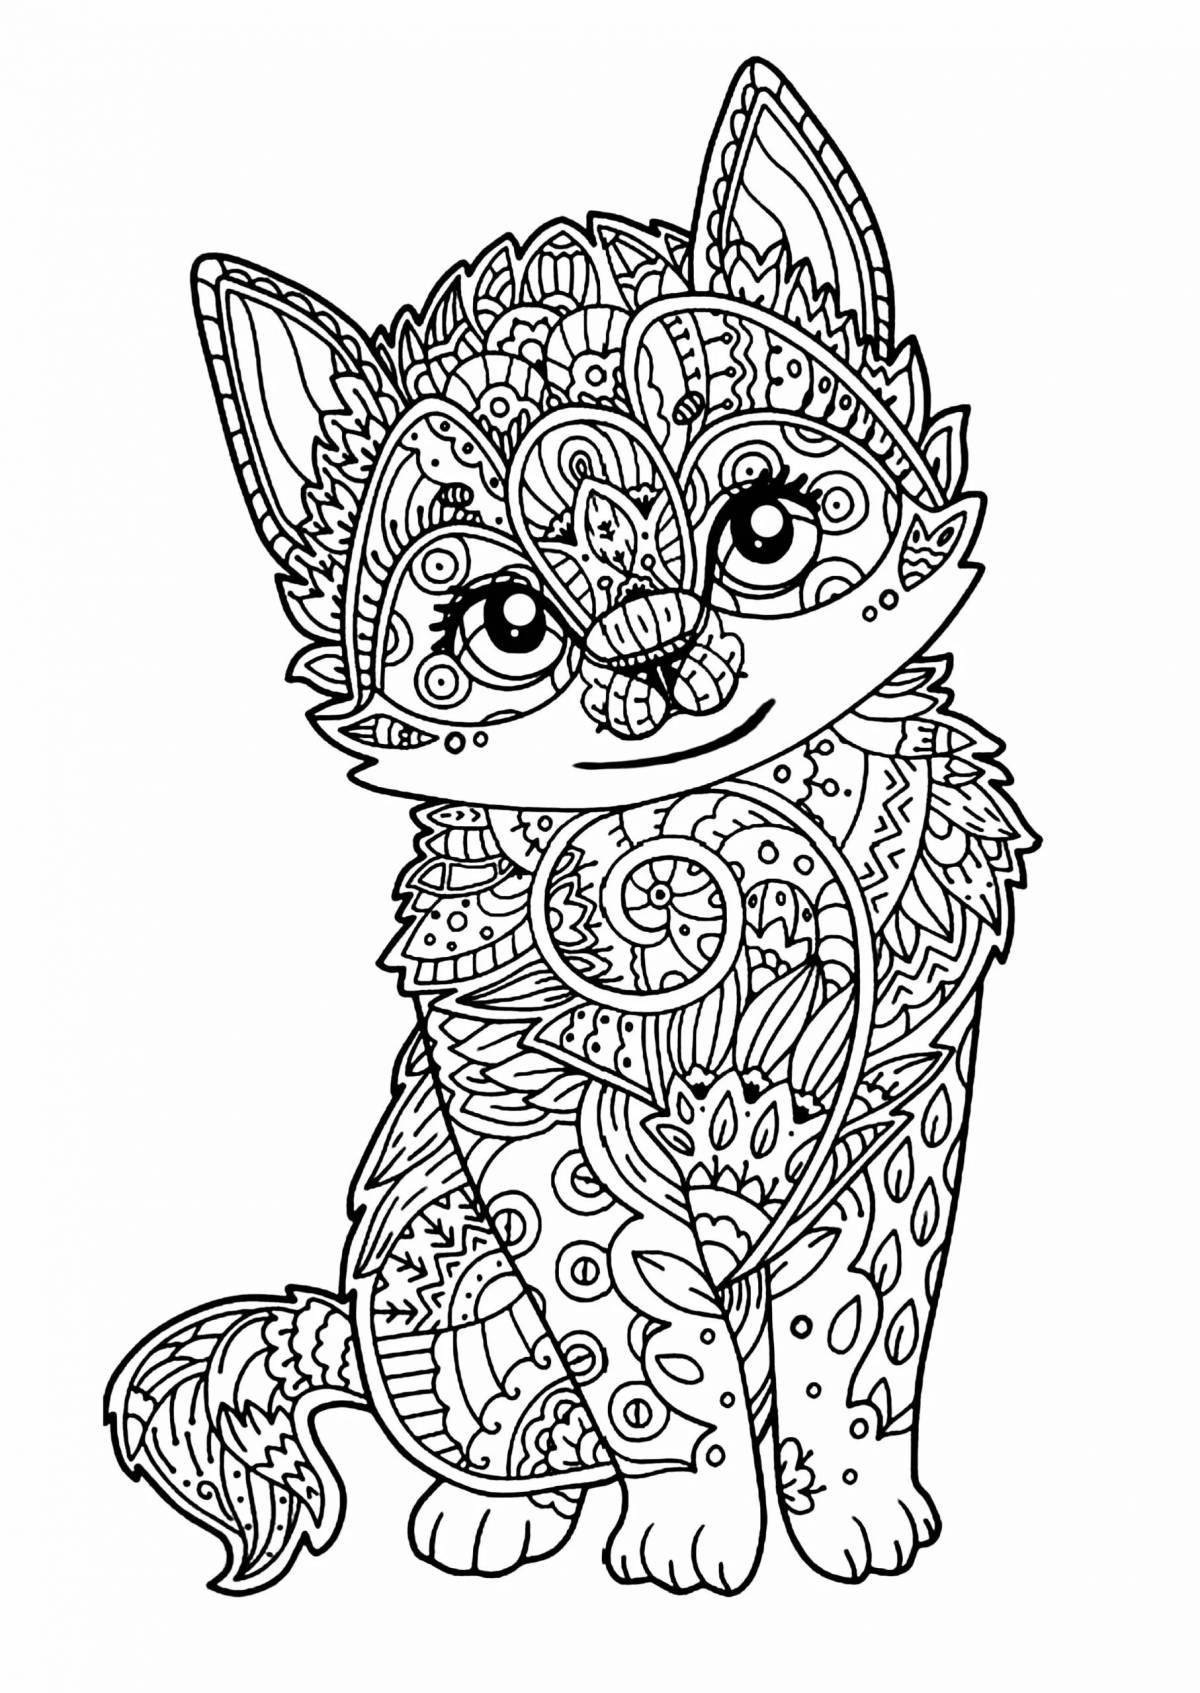 Exquisite anti-stress coloring book for girls 9-10 years old